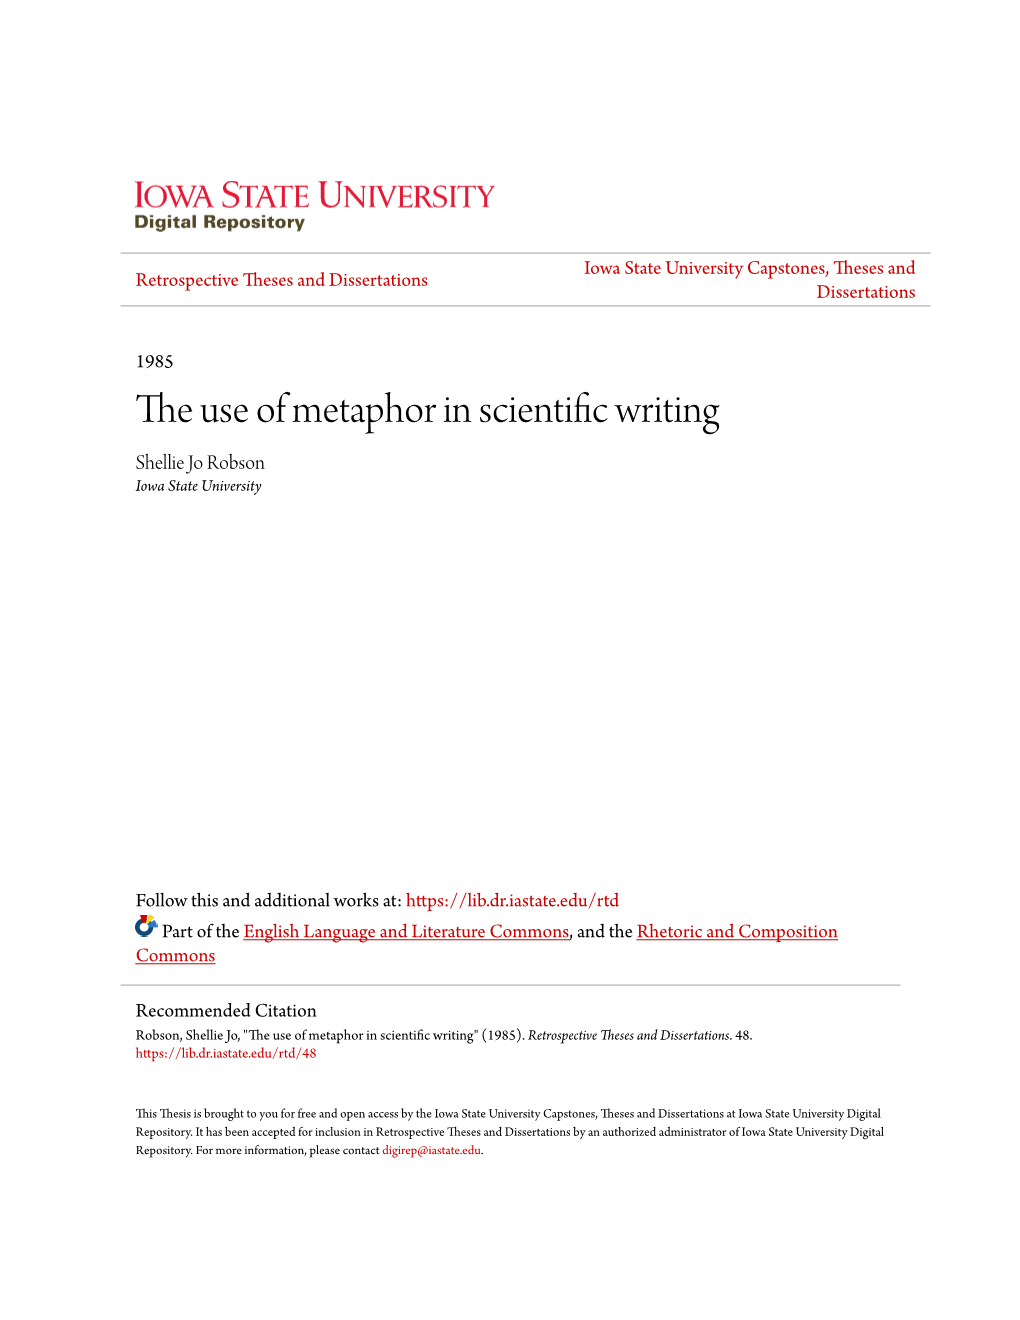 The Use of Metaphor in Scientific Writing" (1985)